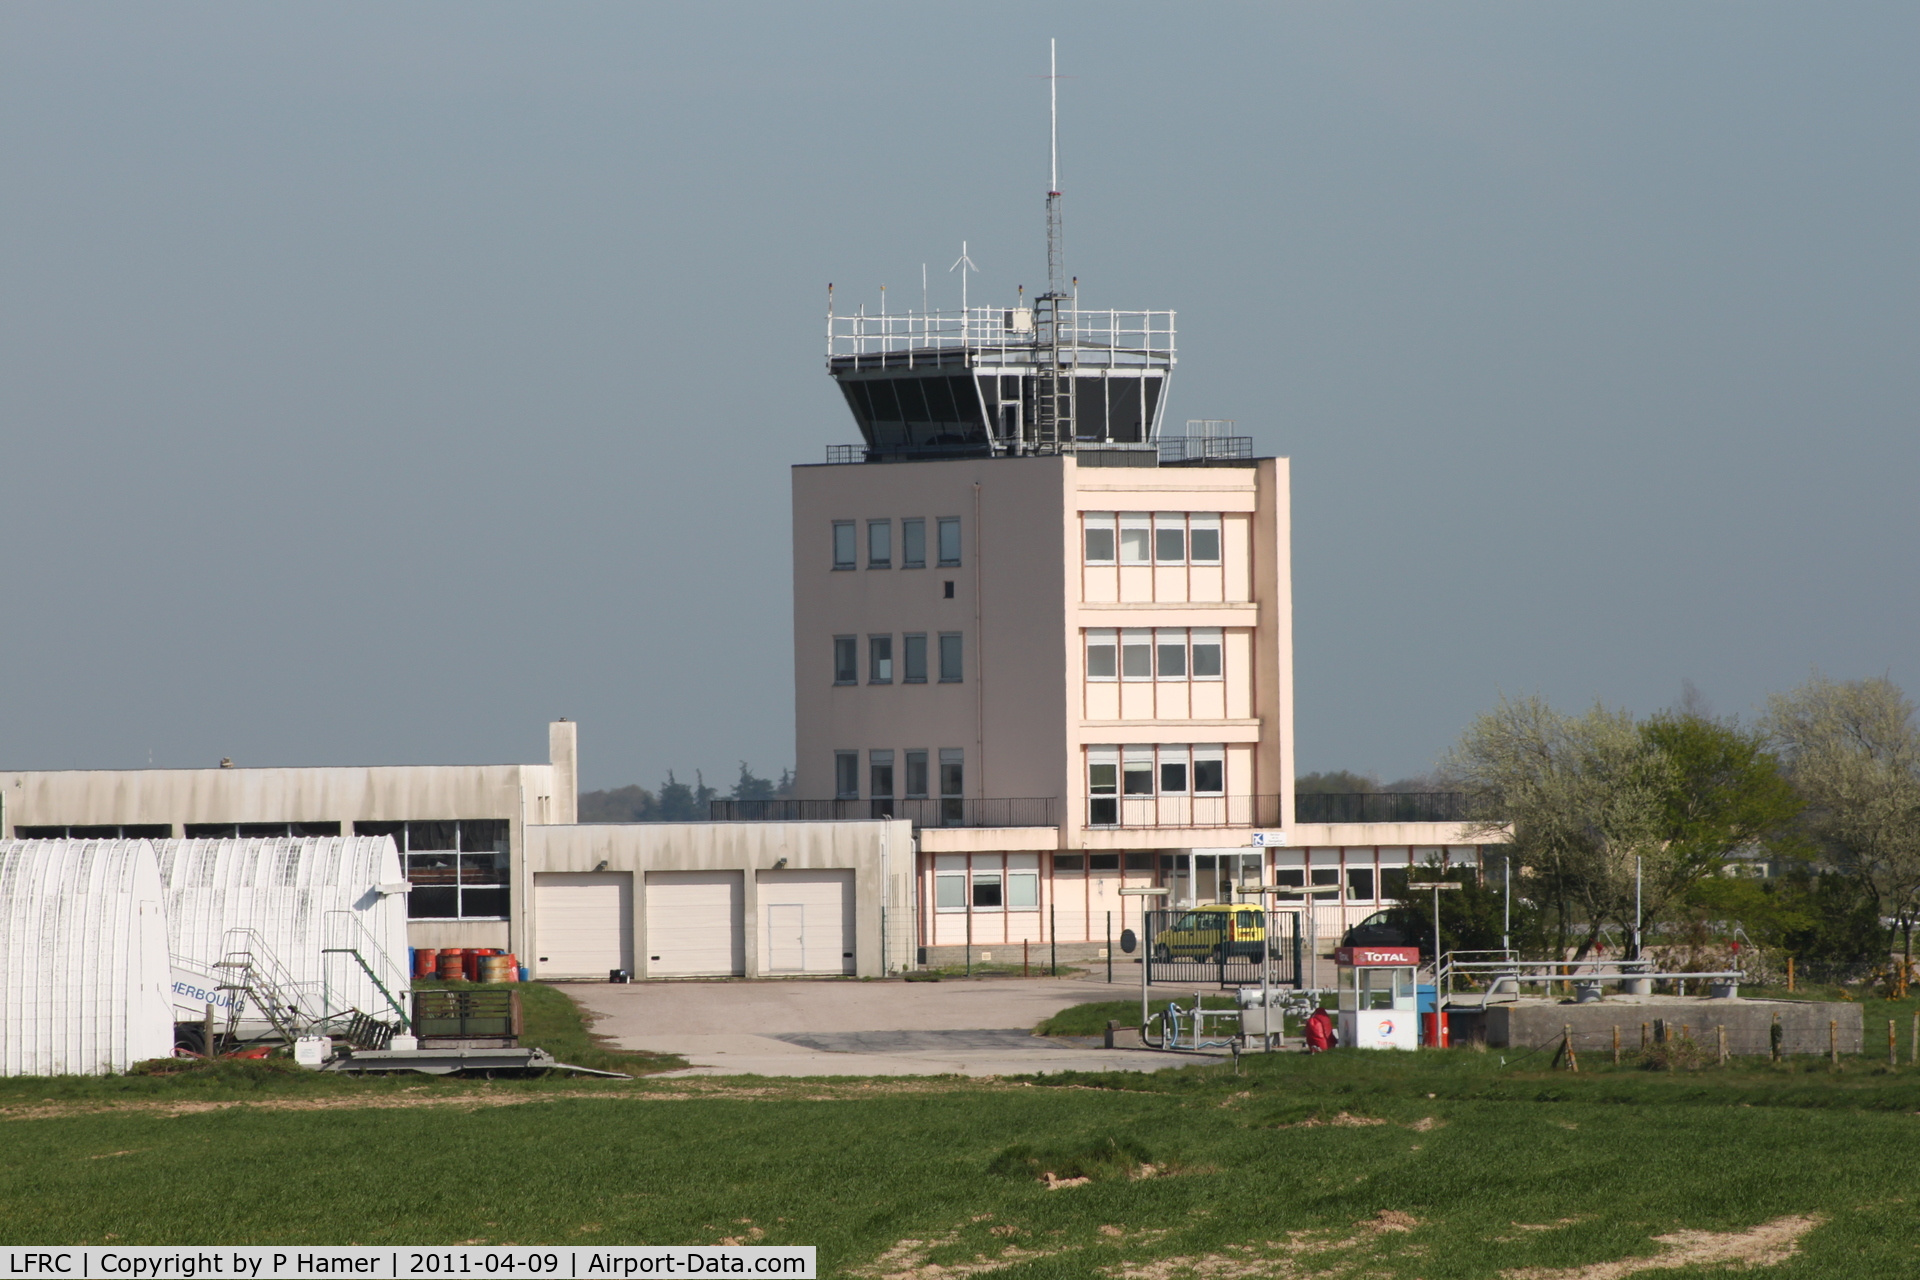 Cherbourg Maupertus Airport, Cherbourg France (LFRC) - Cherbourg Tower